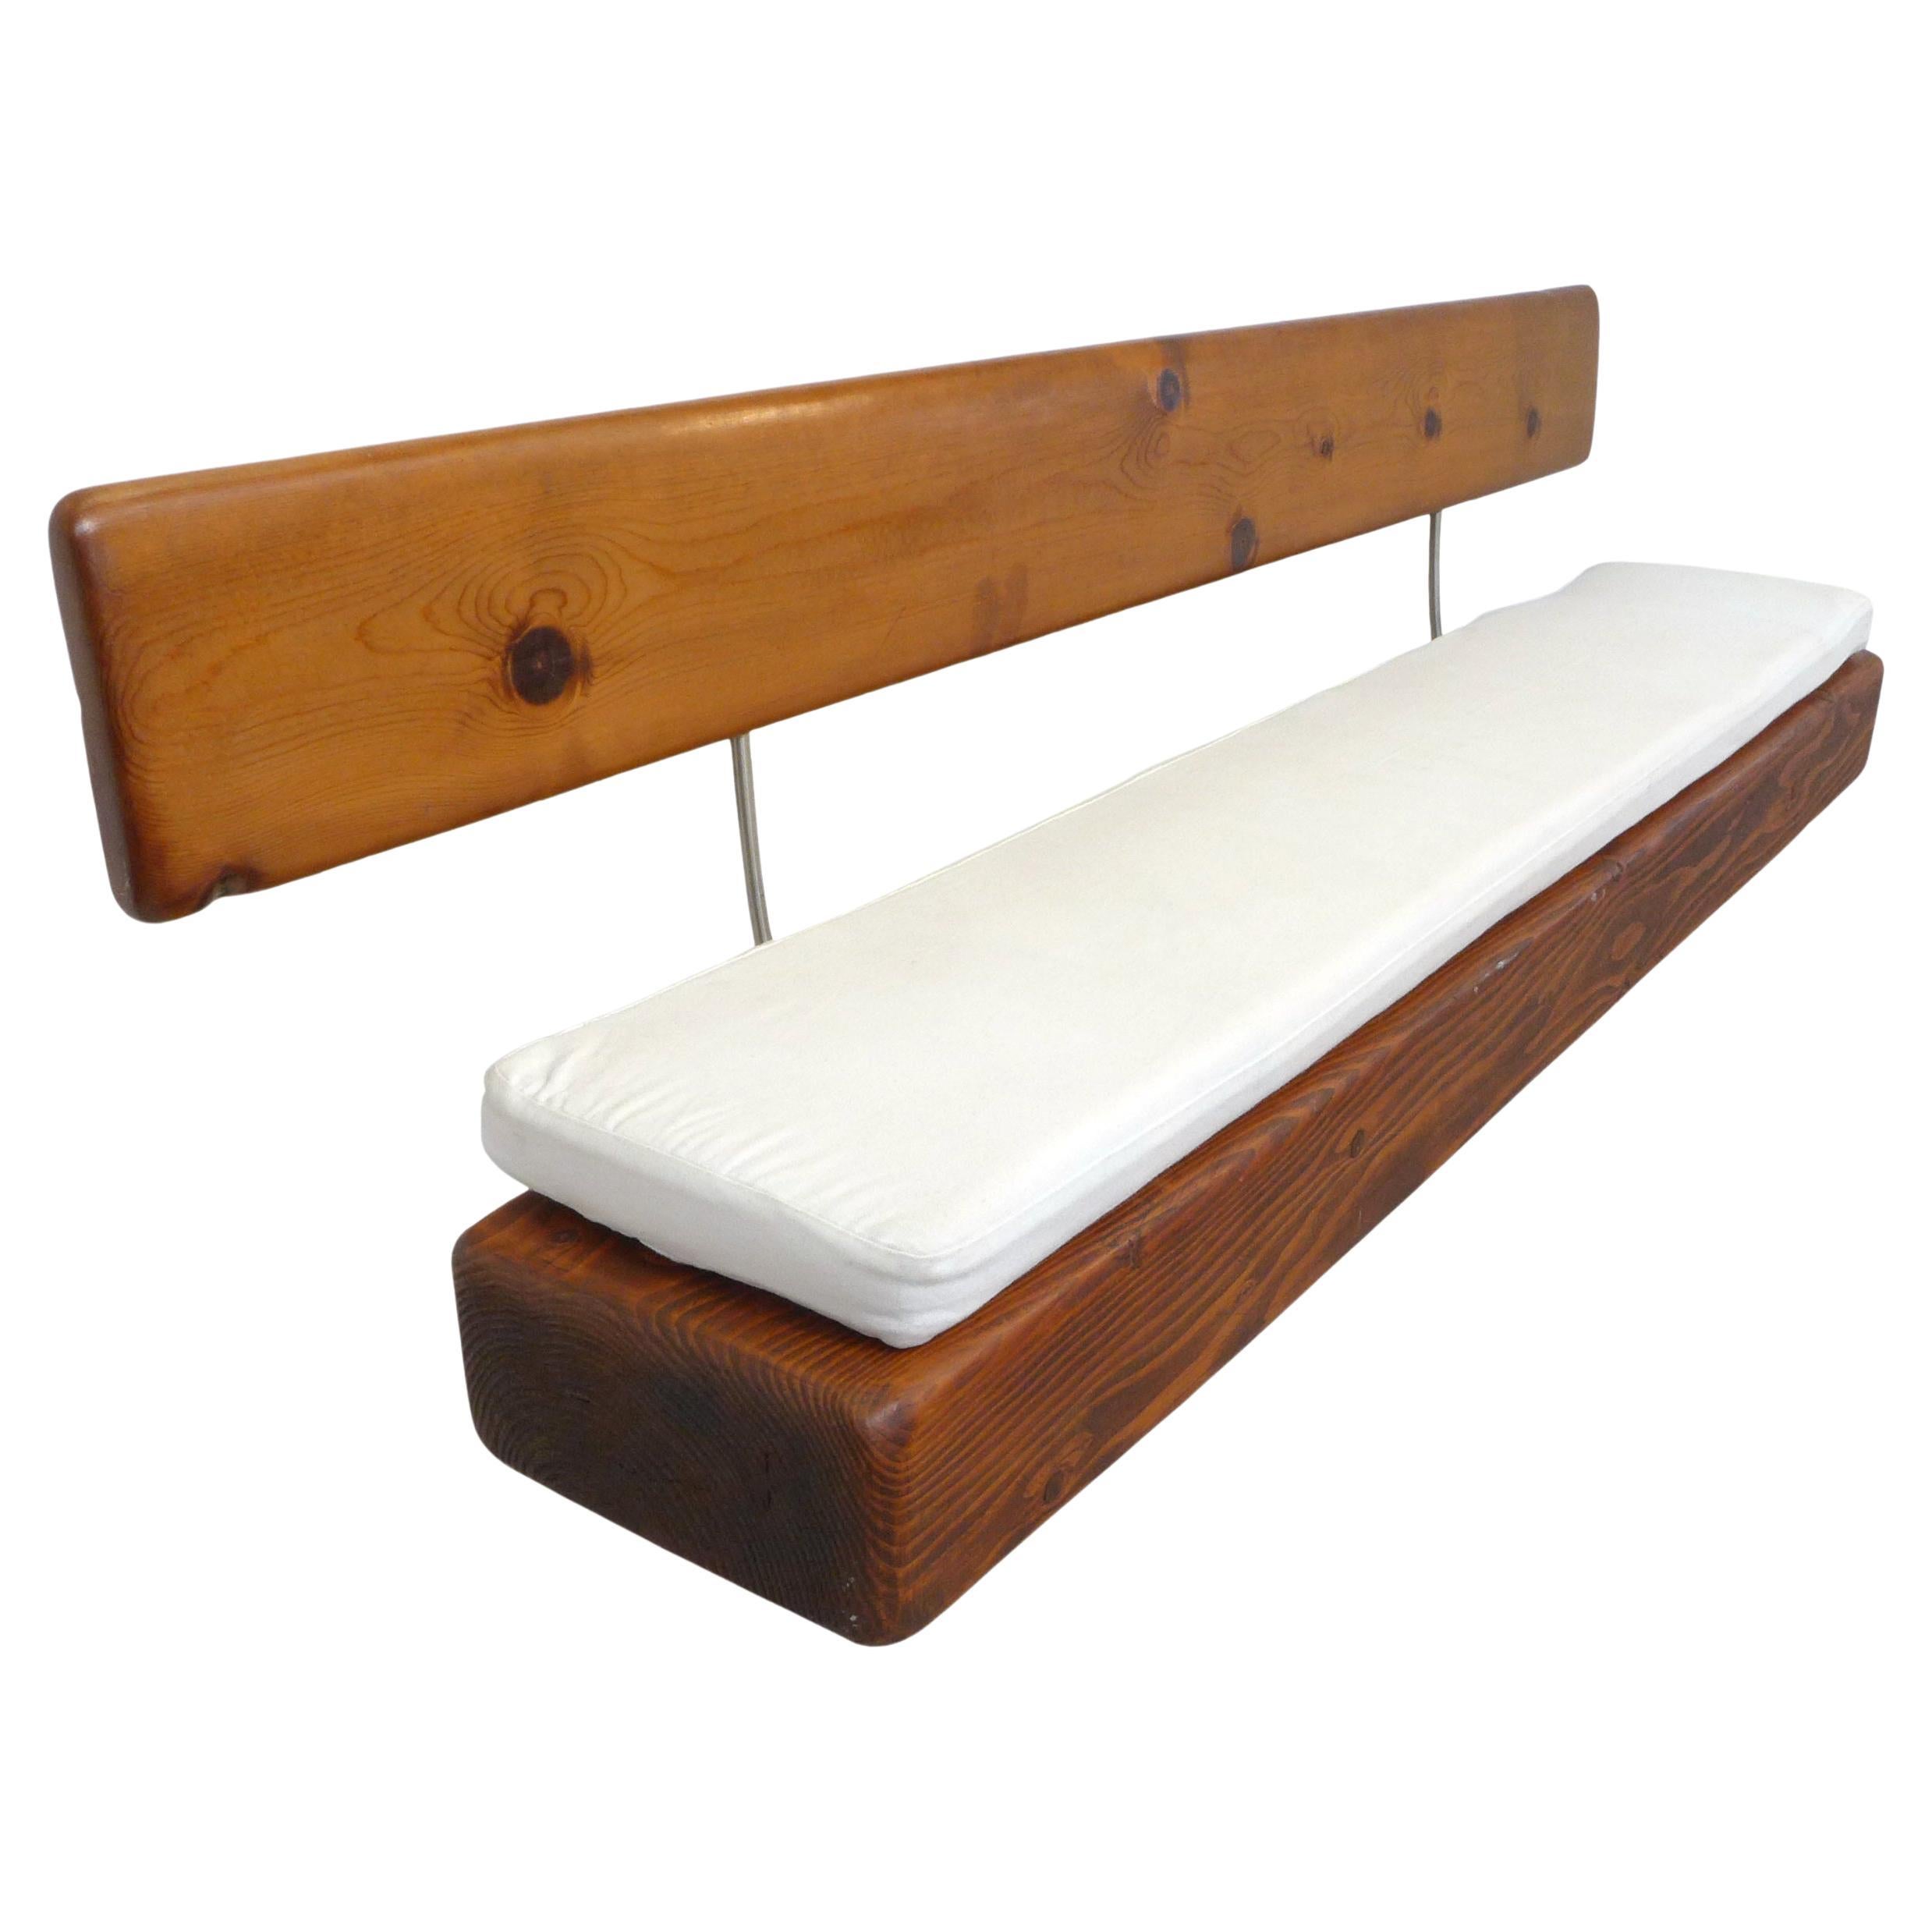 Japanese Inspired Low Wood & Aluminum Bench For Sale